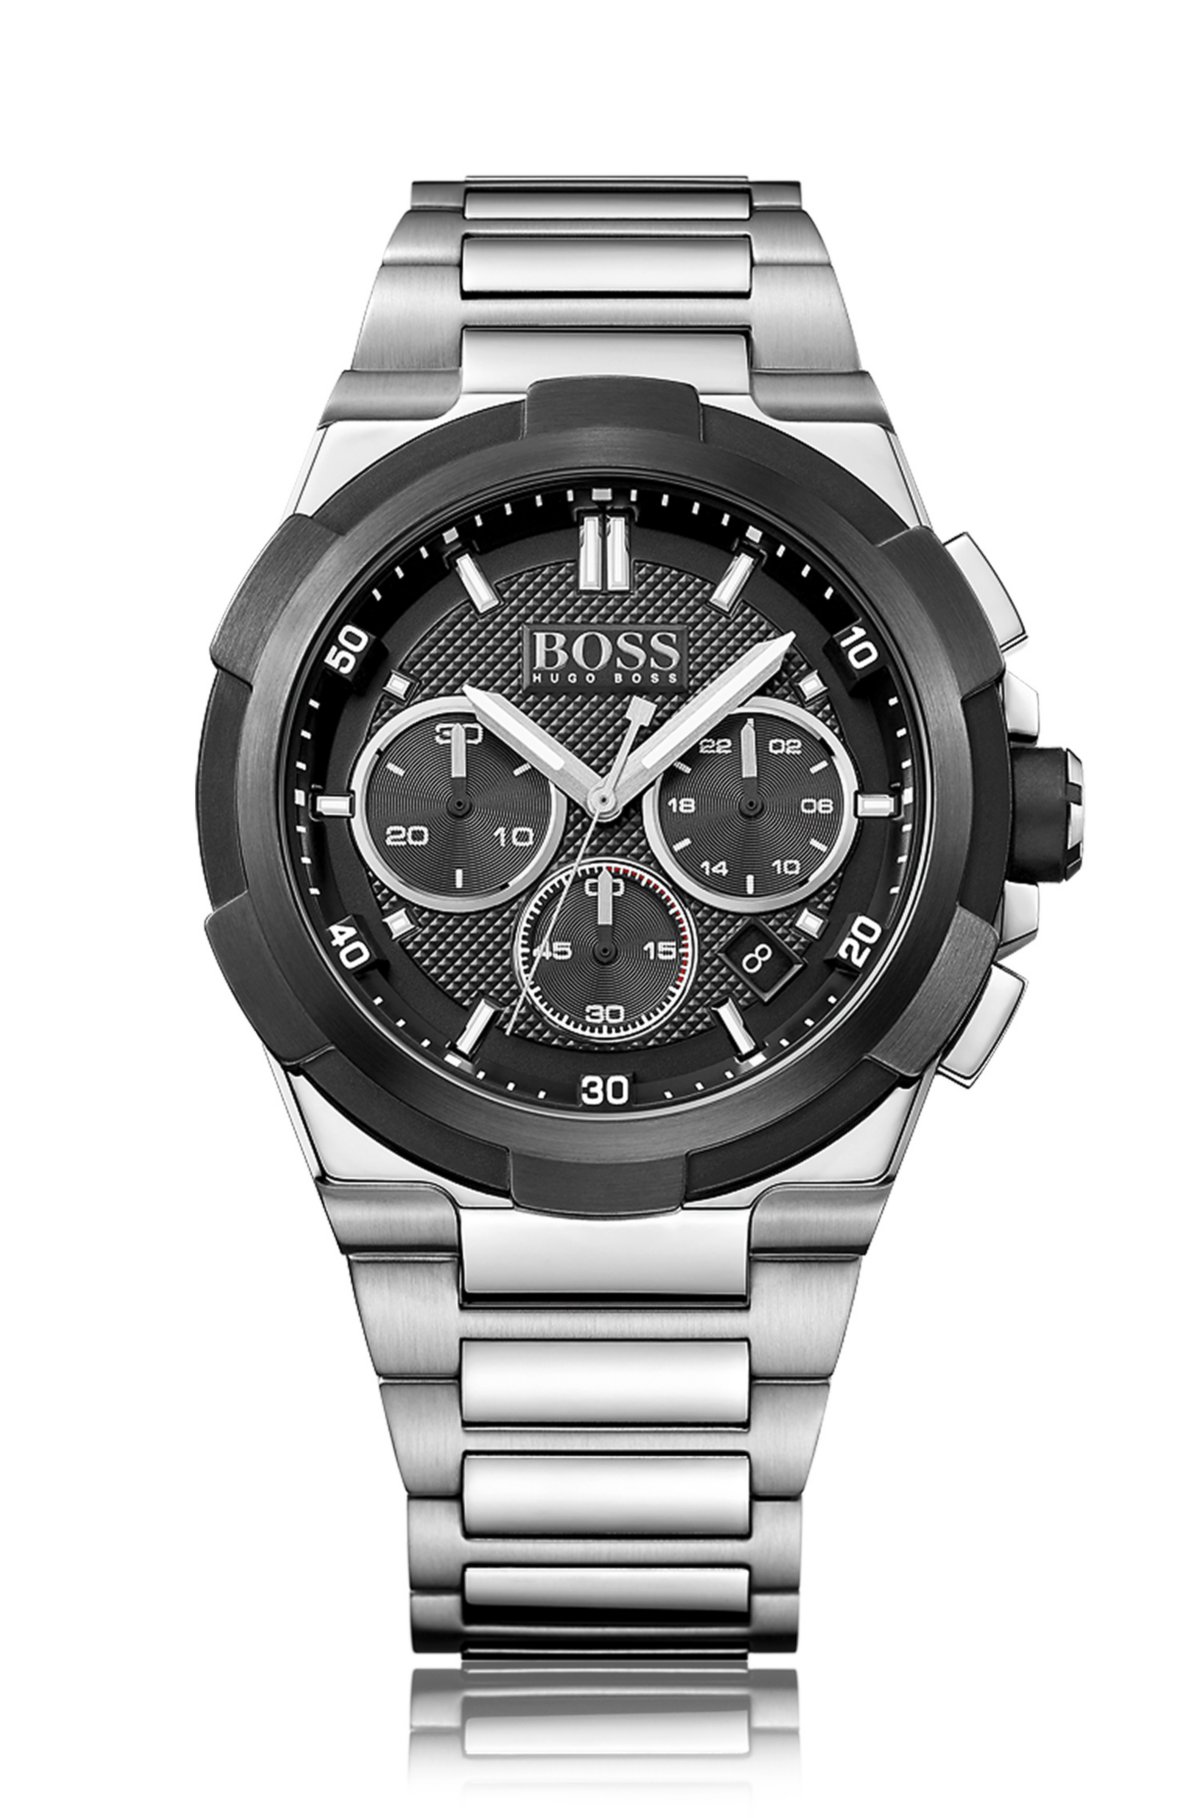 BOSS - Stainless Steel Chronograph | Watch 1513359